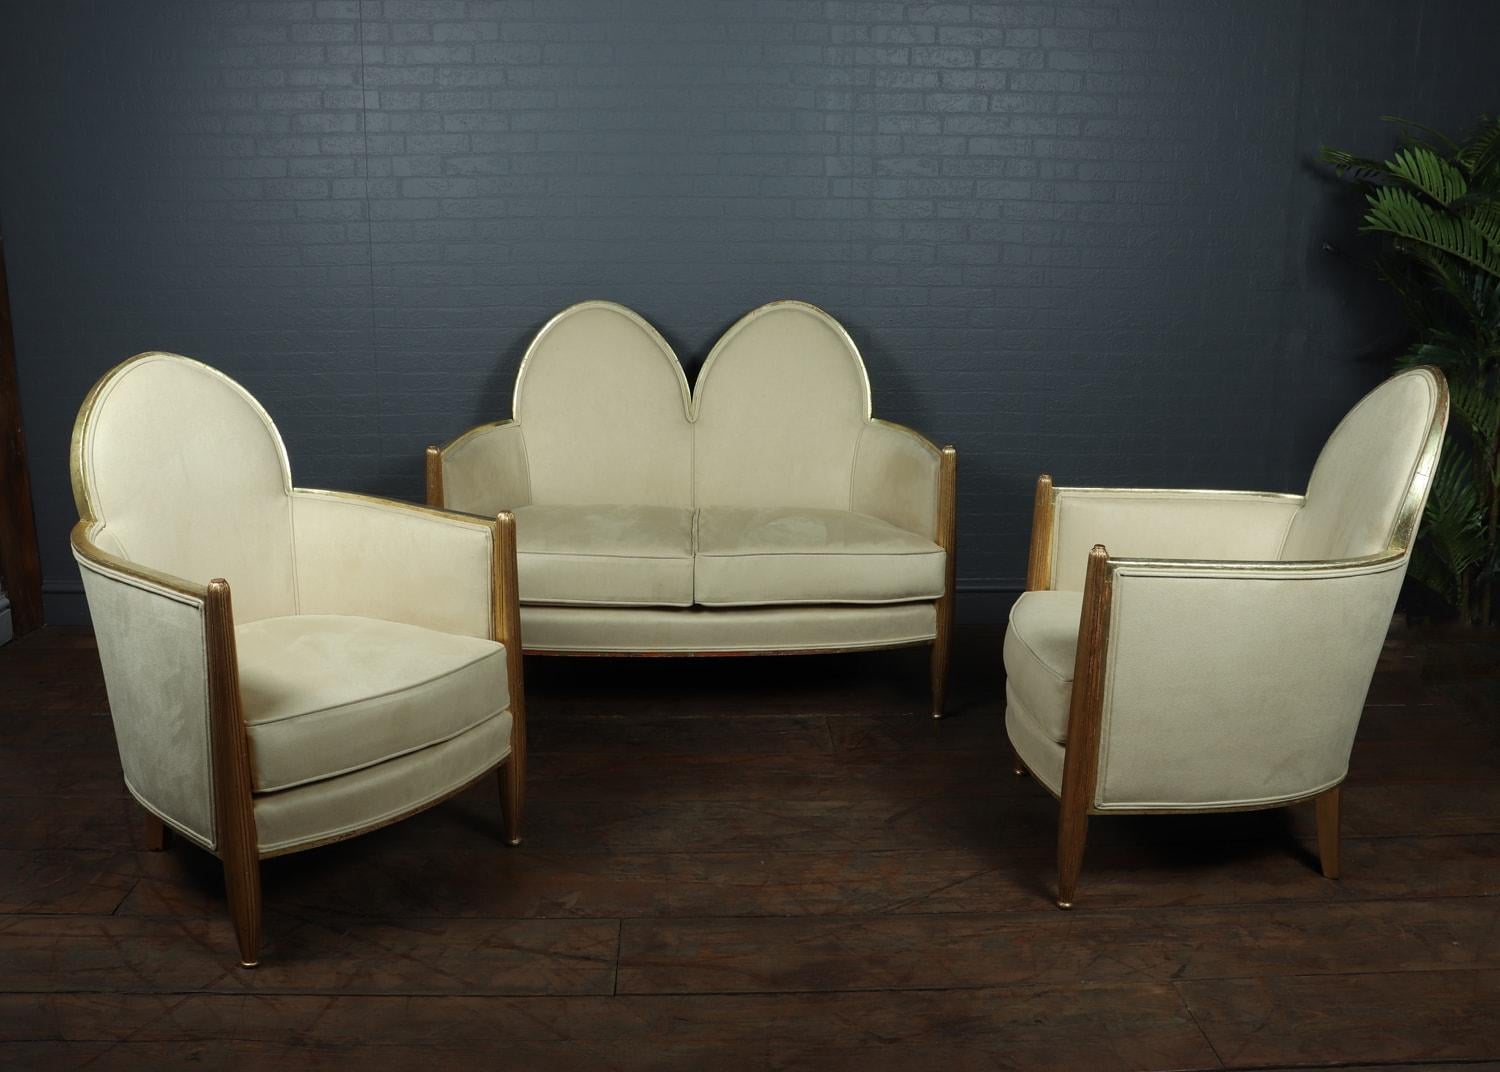 Early 20th Century Art Deco Gilt-wood Salon Suite Attributed to Paul Follot, c1925